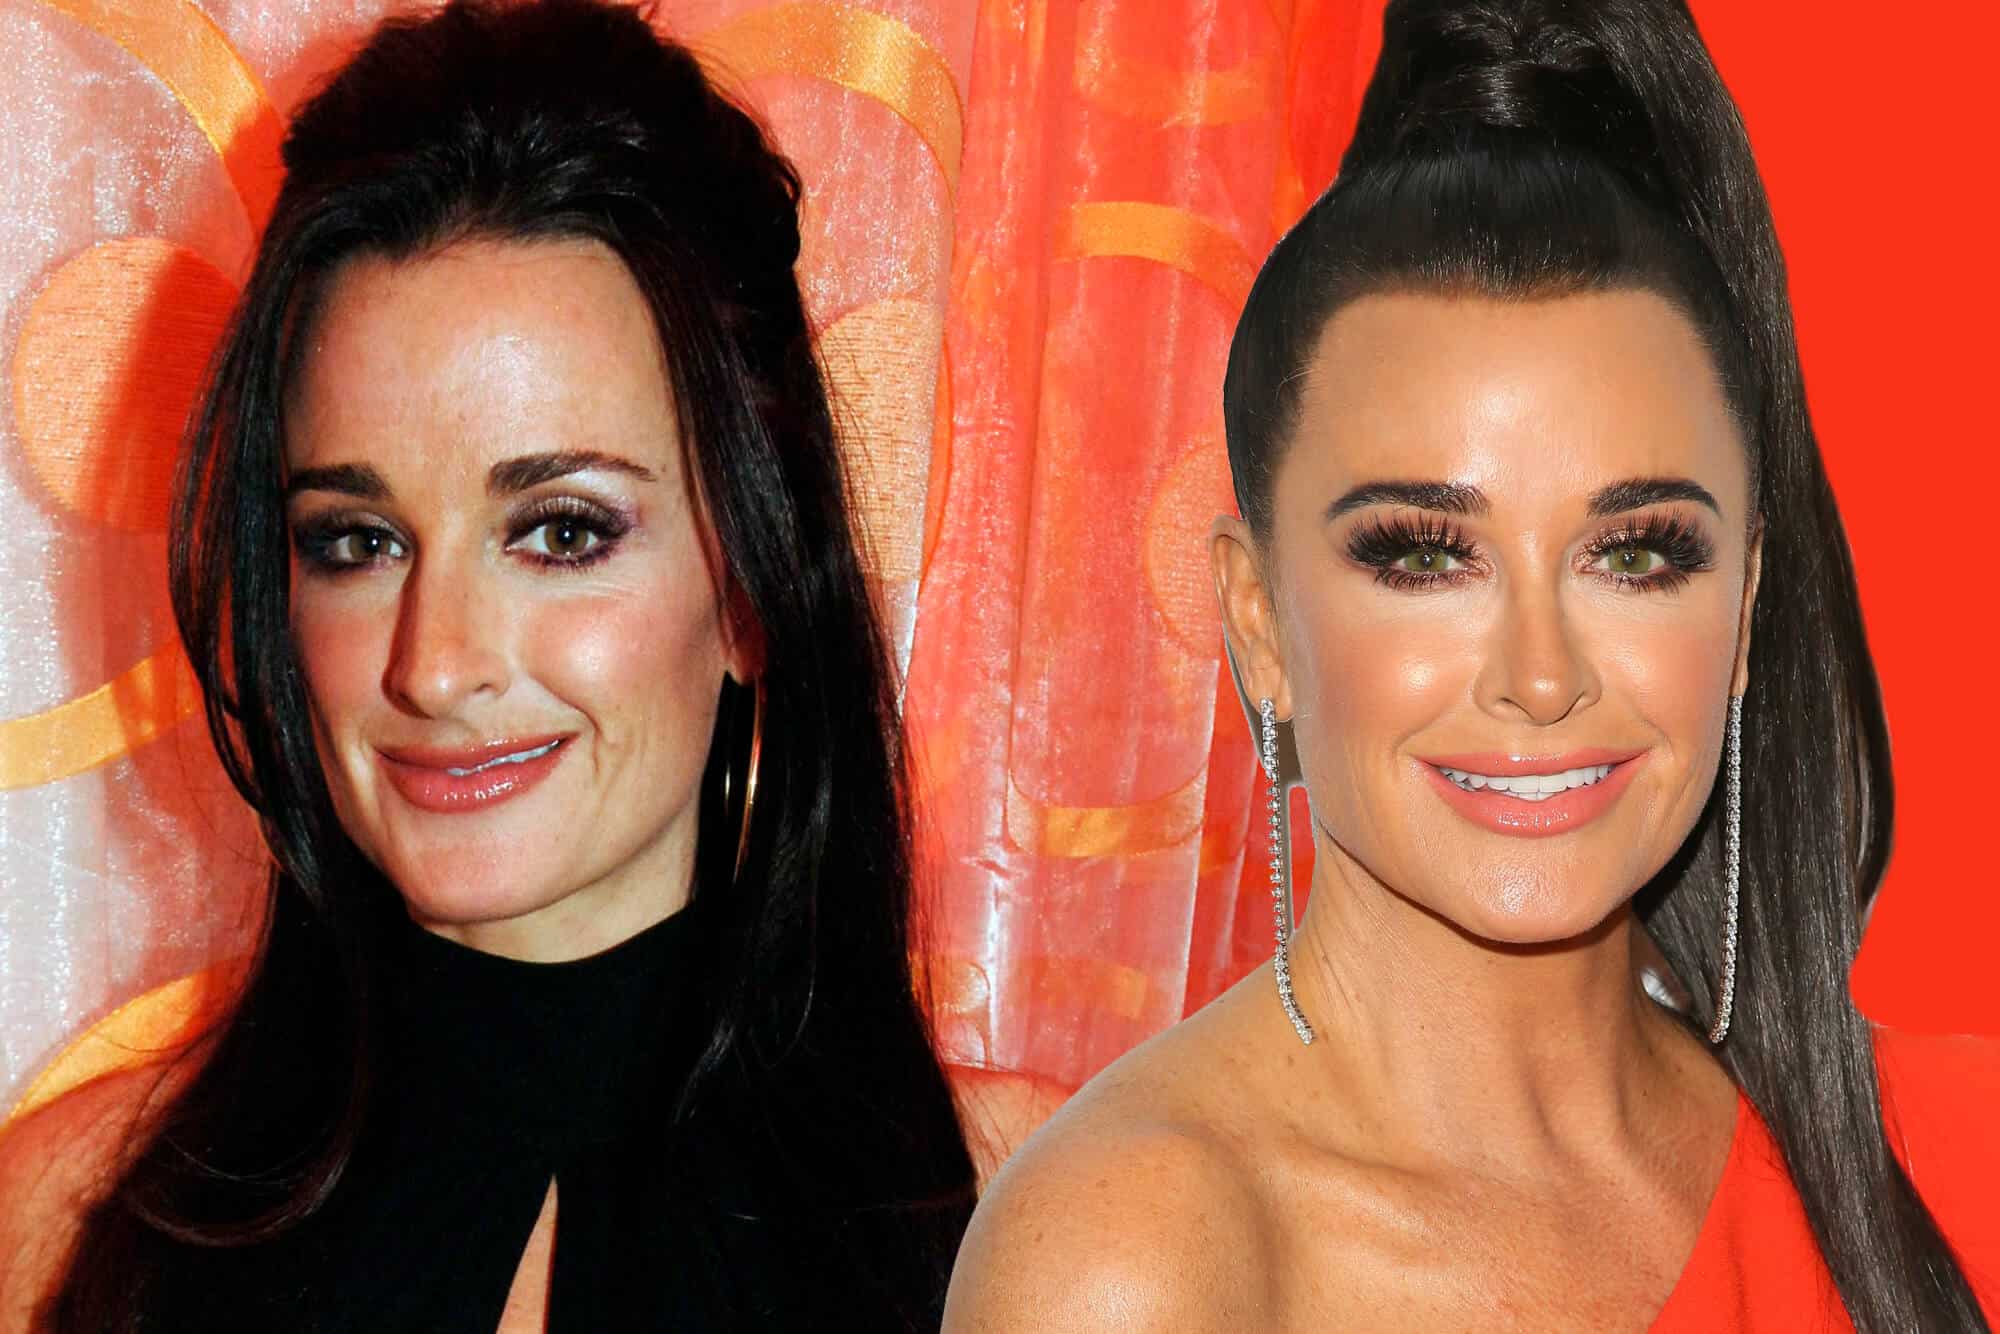 Kyle Richards Before and After Her Nose Surgery (Credits: US Weekly)